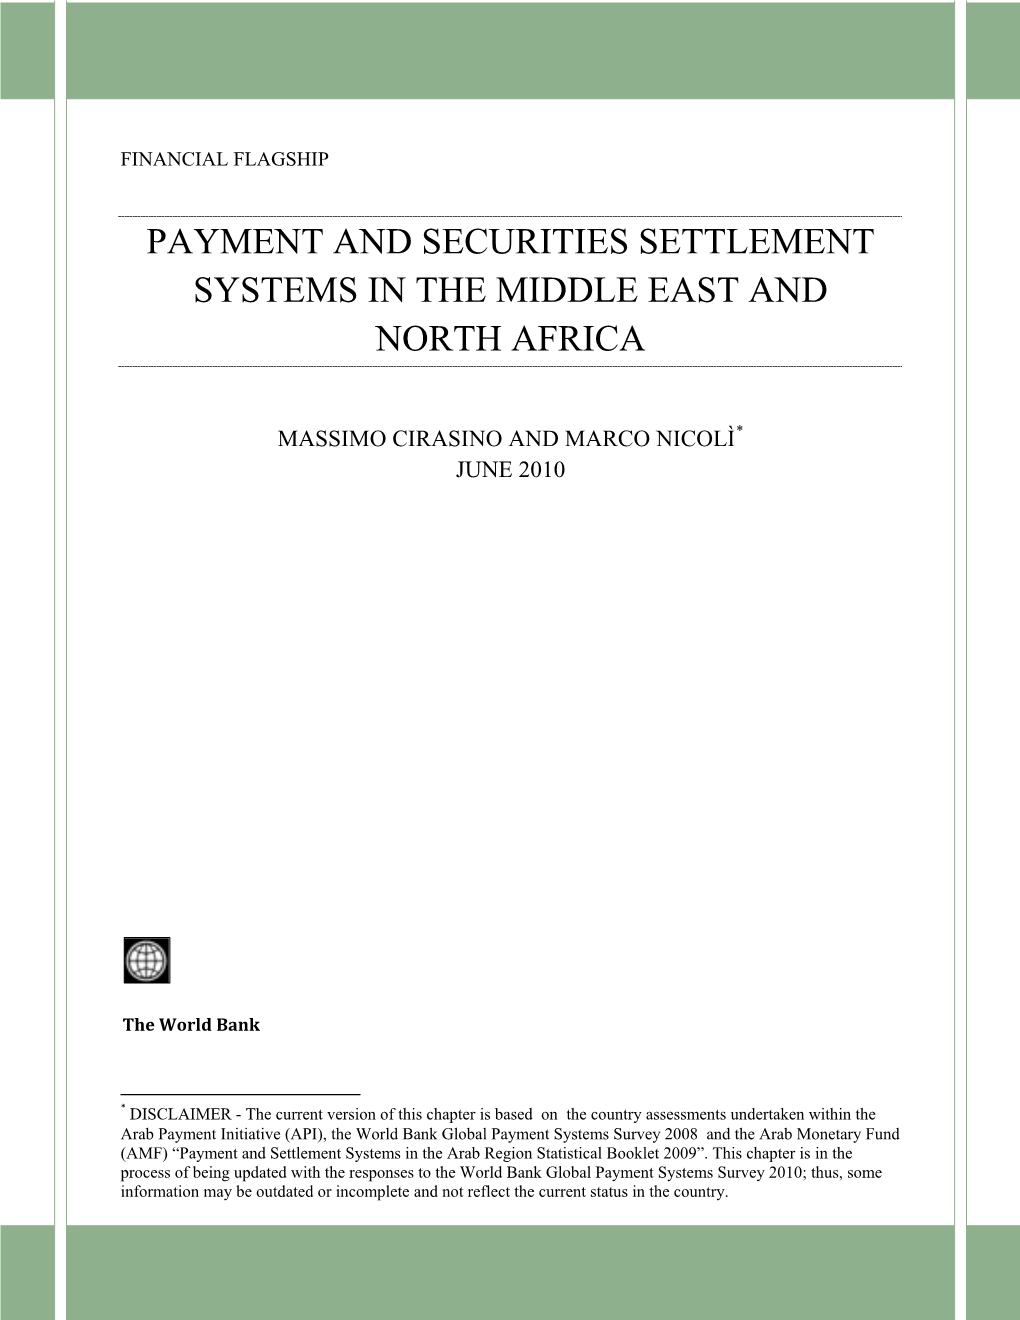 Payment and Securities Settlement Systems in Middle East and North